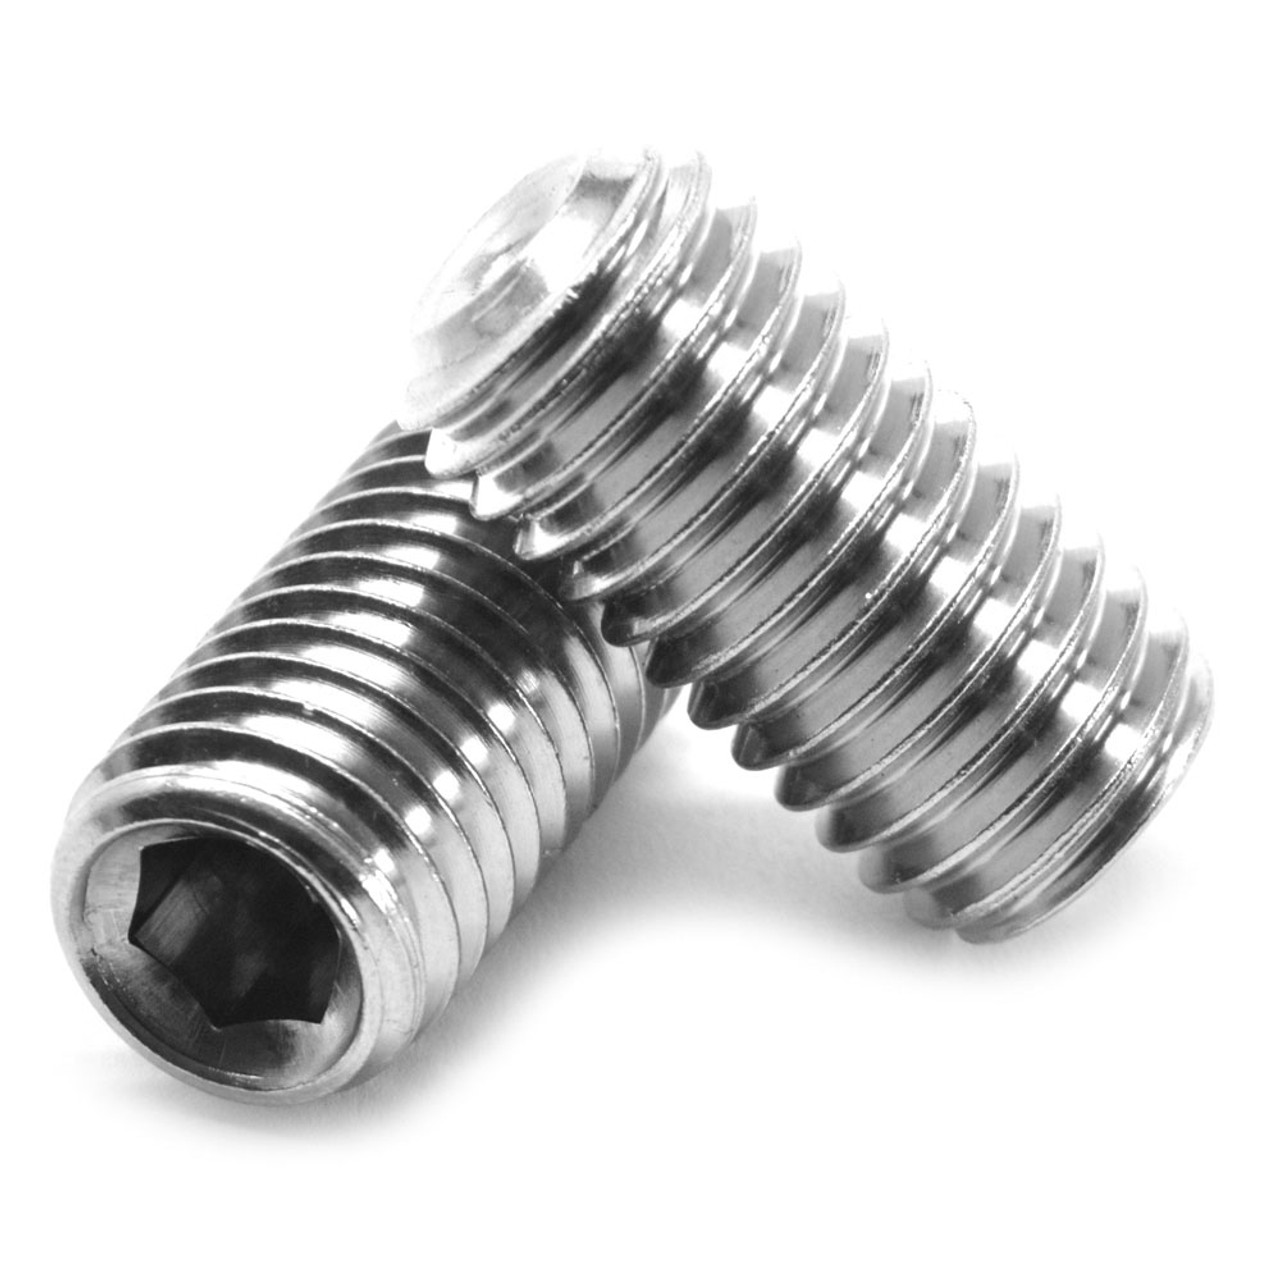 M8 x 1.25 x 50 MM Coarse Thread DIN 916 / ISO 4029 Socket Set Screw Cup Point Stainless Steel 316